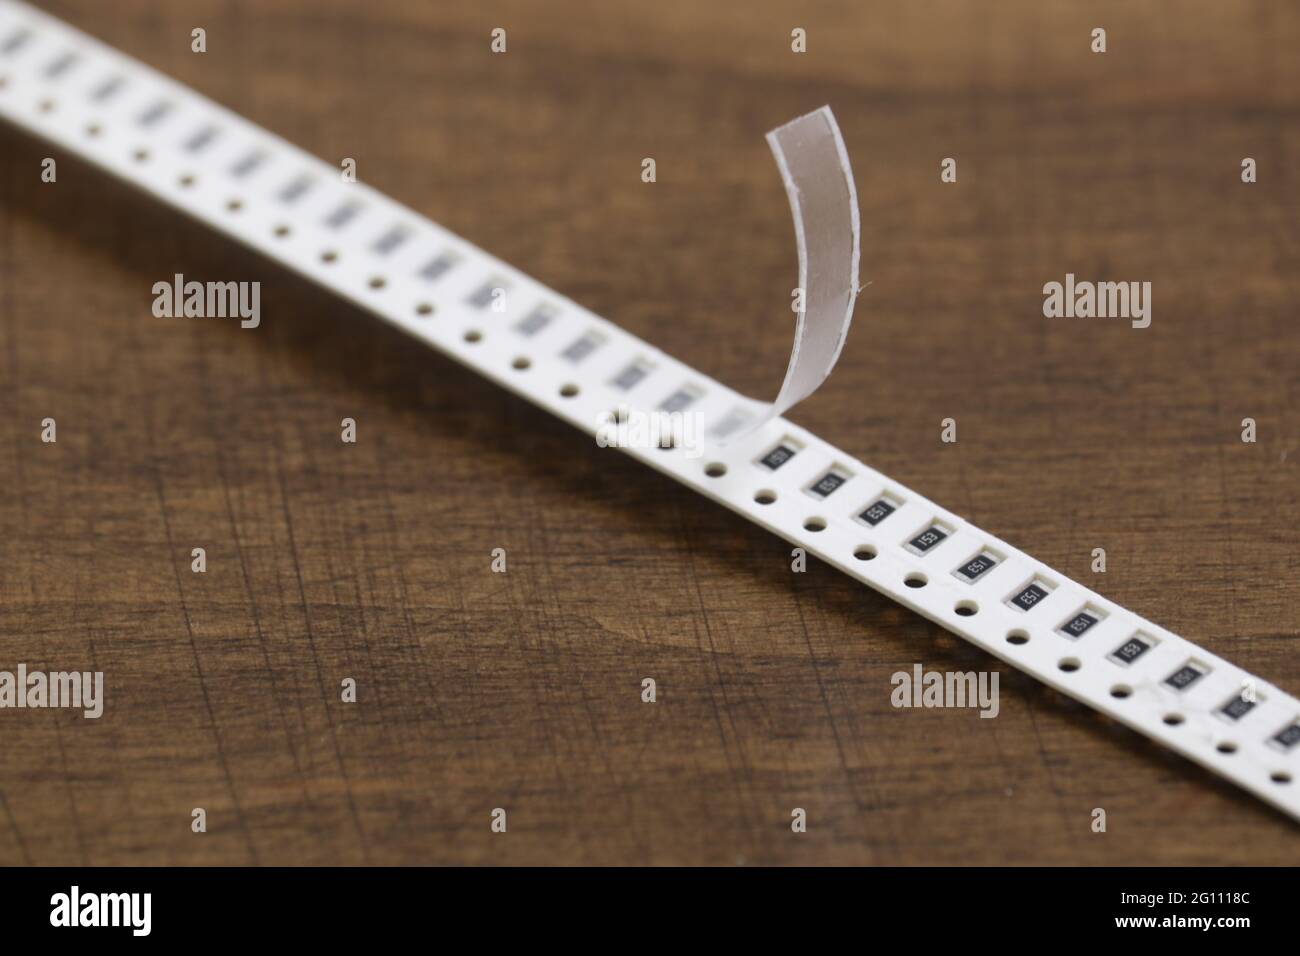 Electronic components: smd resistors on paper tape. Two-terminal passive components. Stock Photo